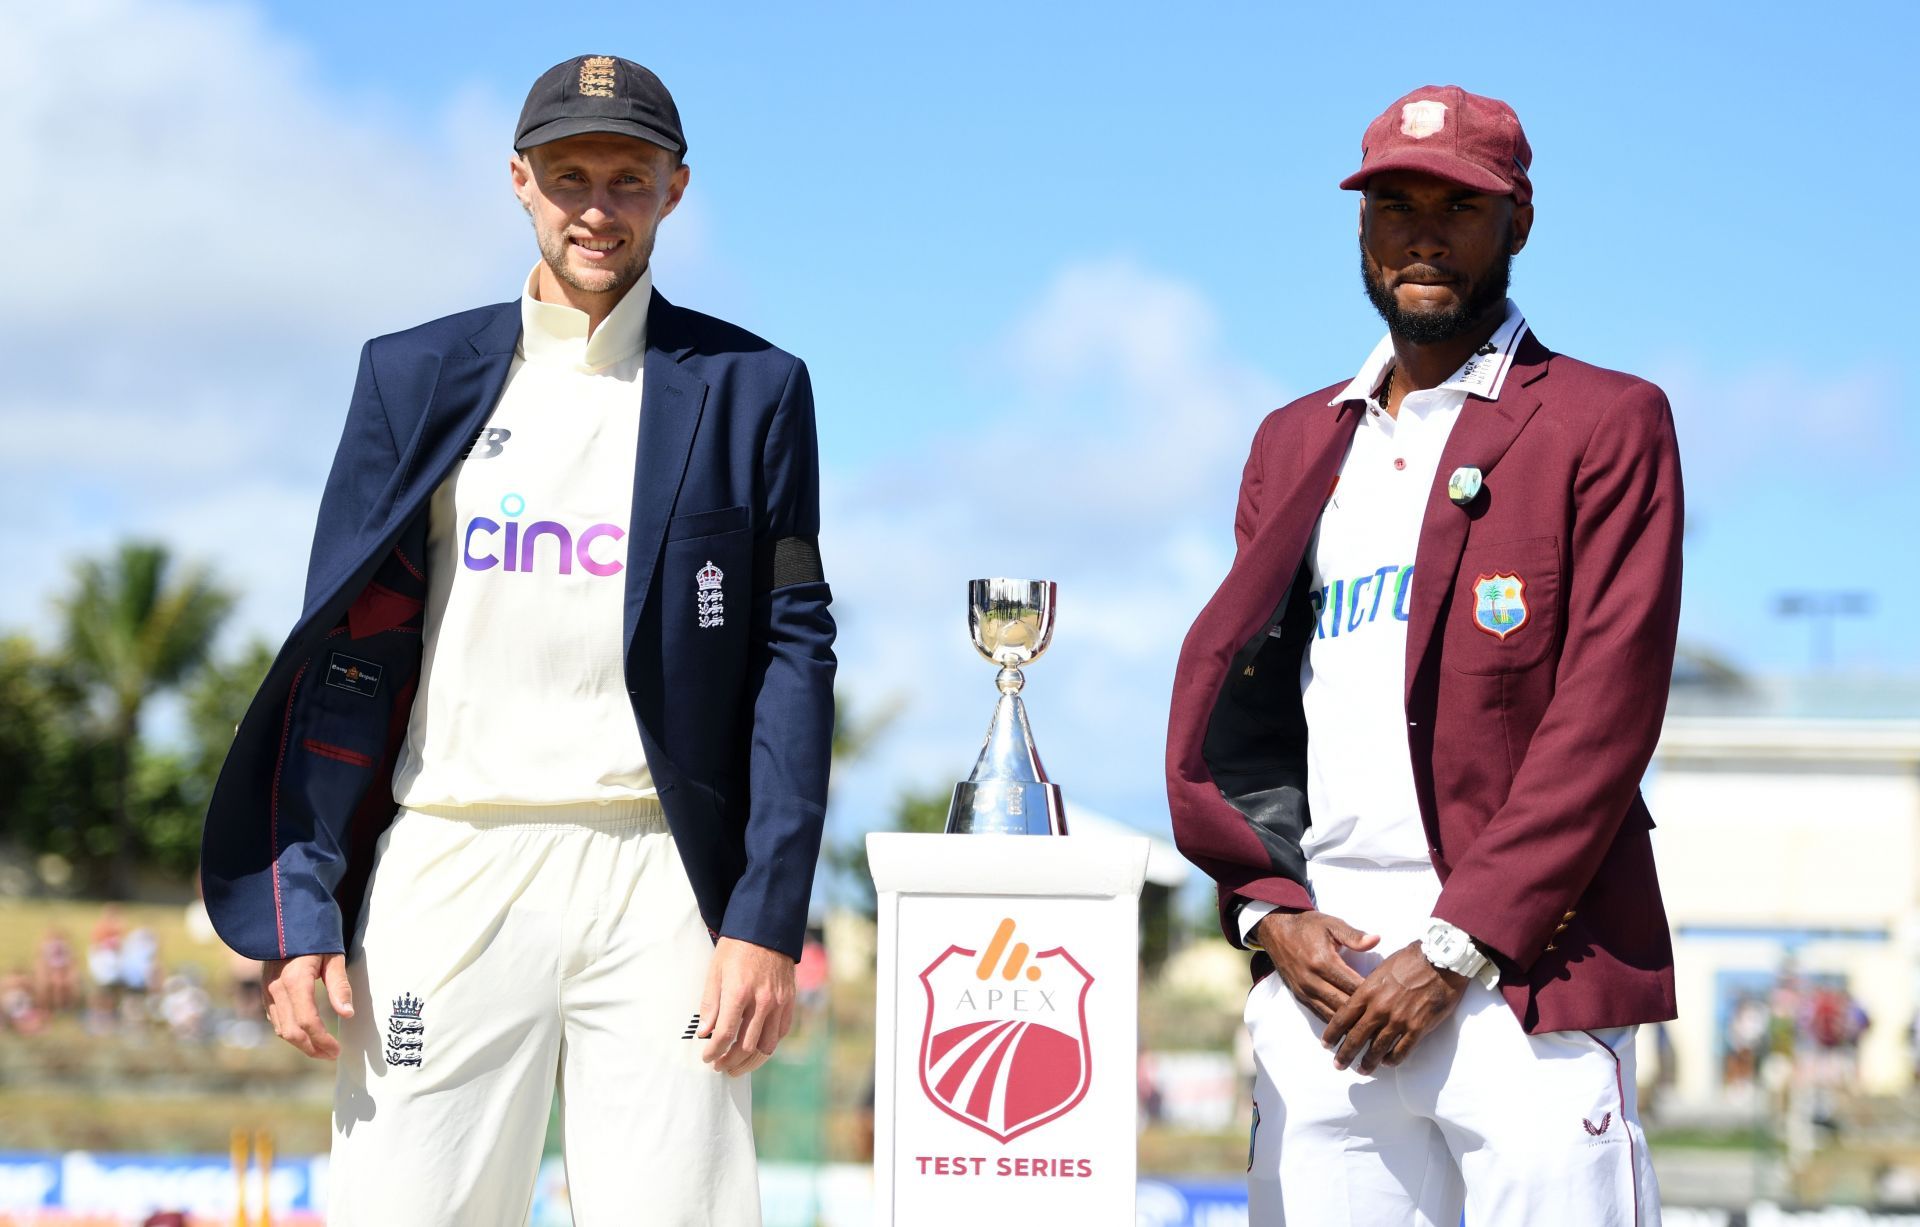 The WI vs ENG series is an opportunity for England to improve their record in the Caribbean